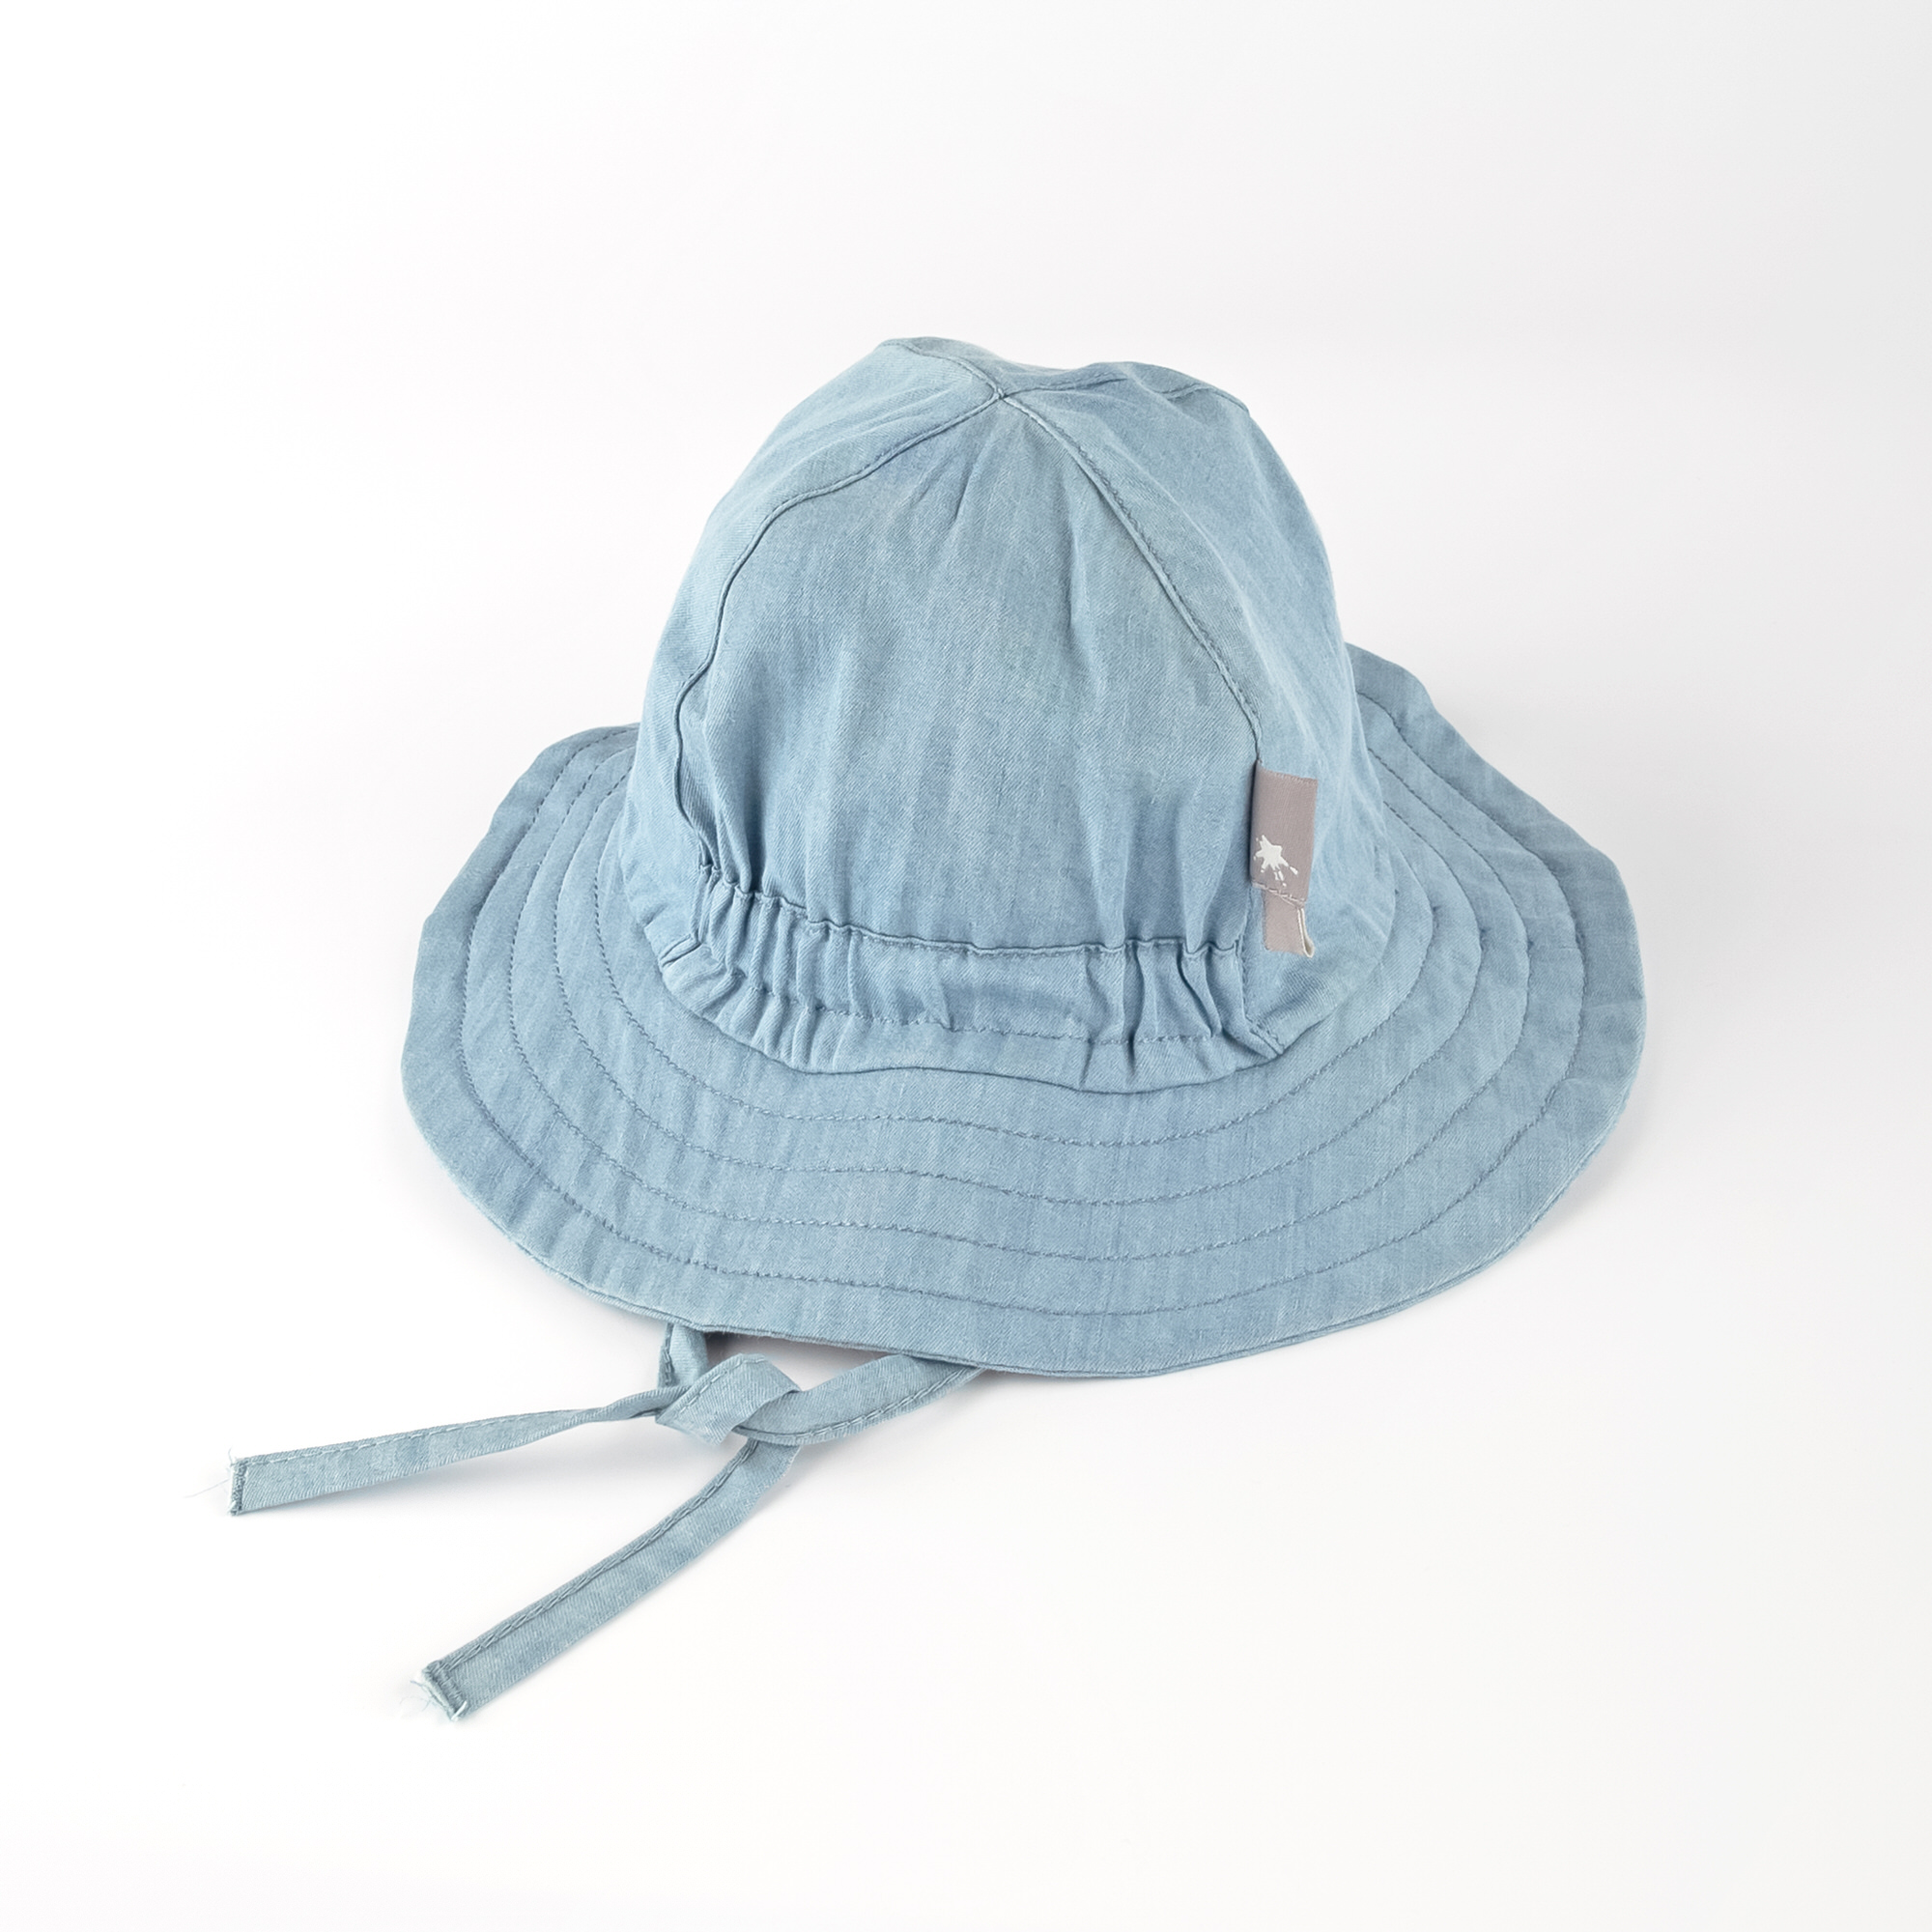 Brimmed baby sun hat with ties, light blue